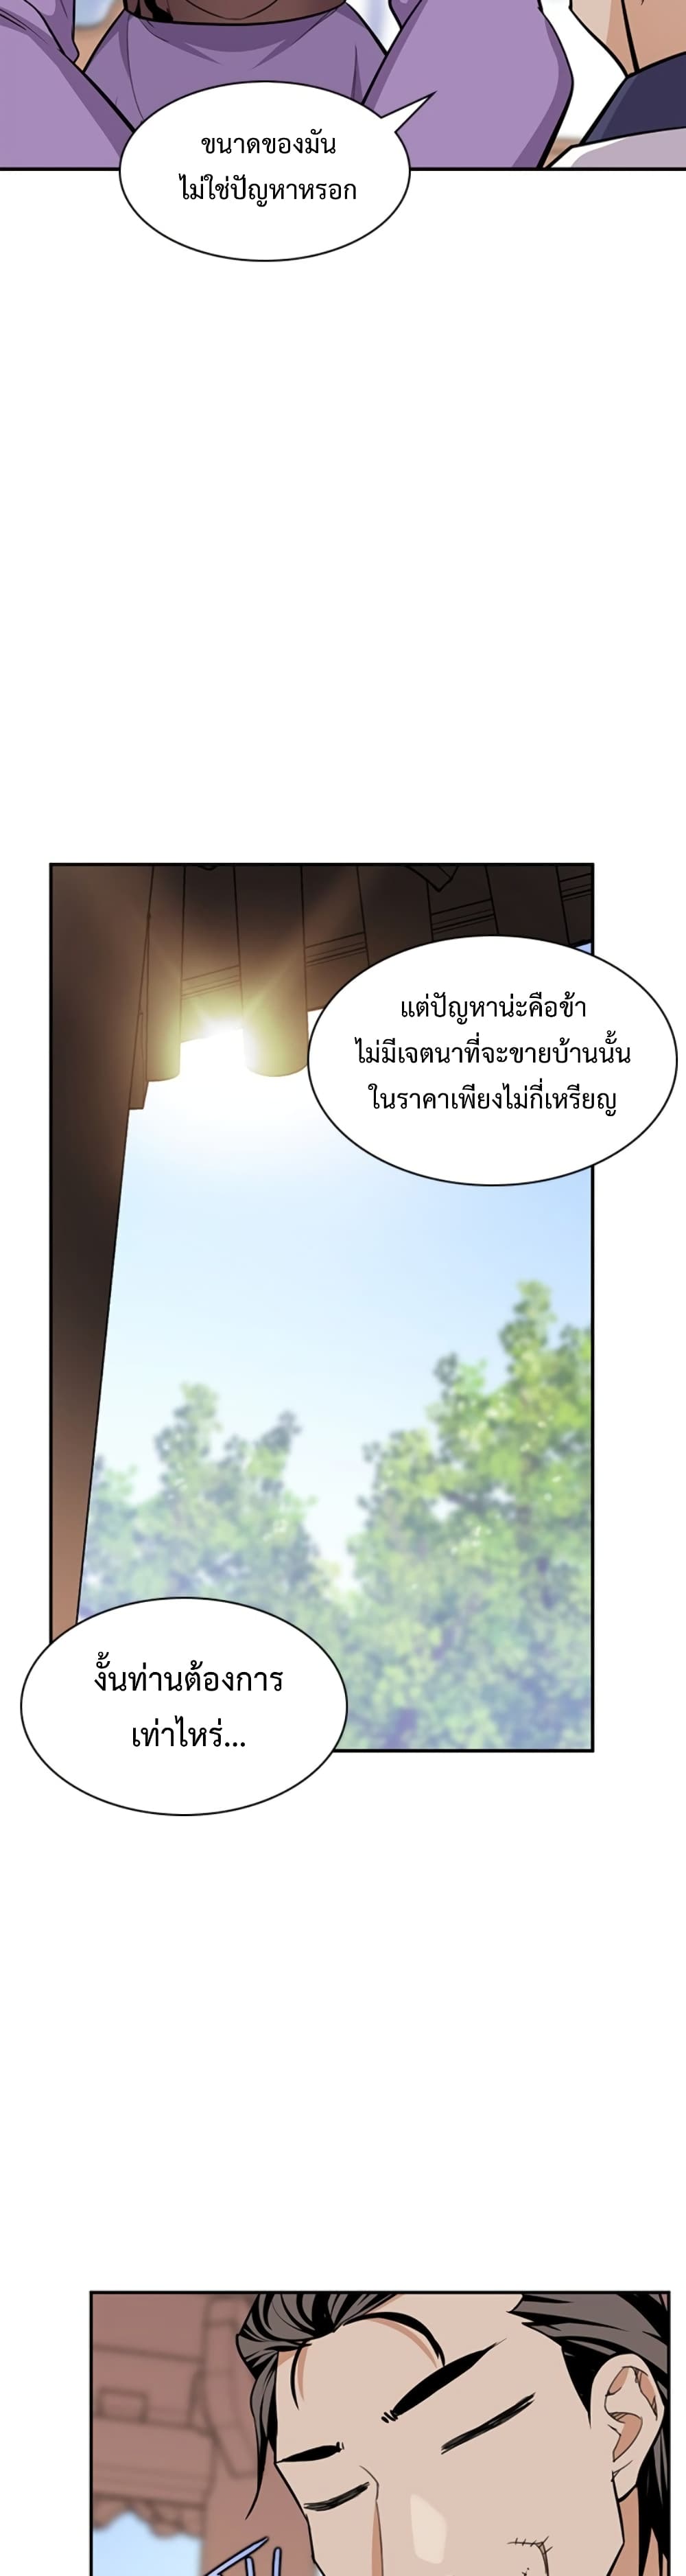 The Strongest Ever à¸à¸­à¸à¸à¸µà¹ 33 (32)